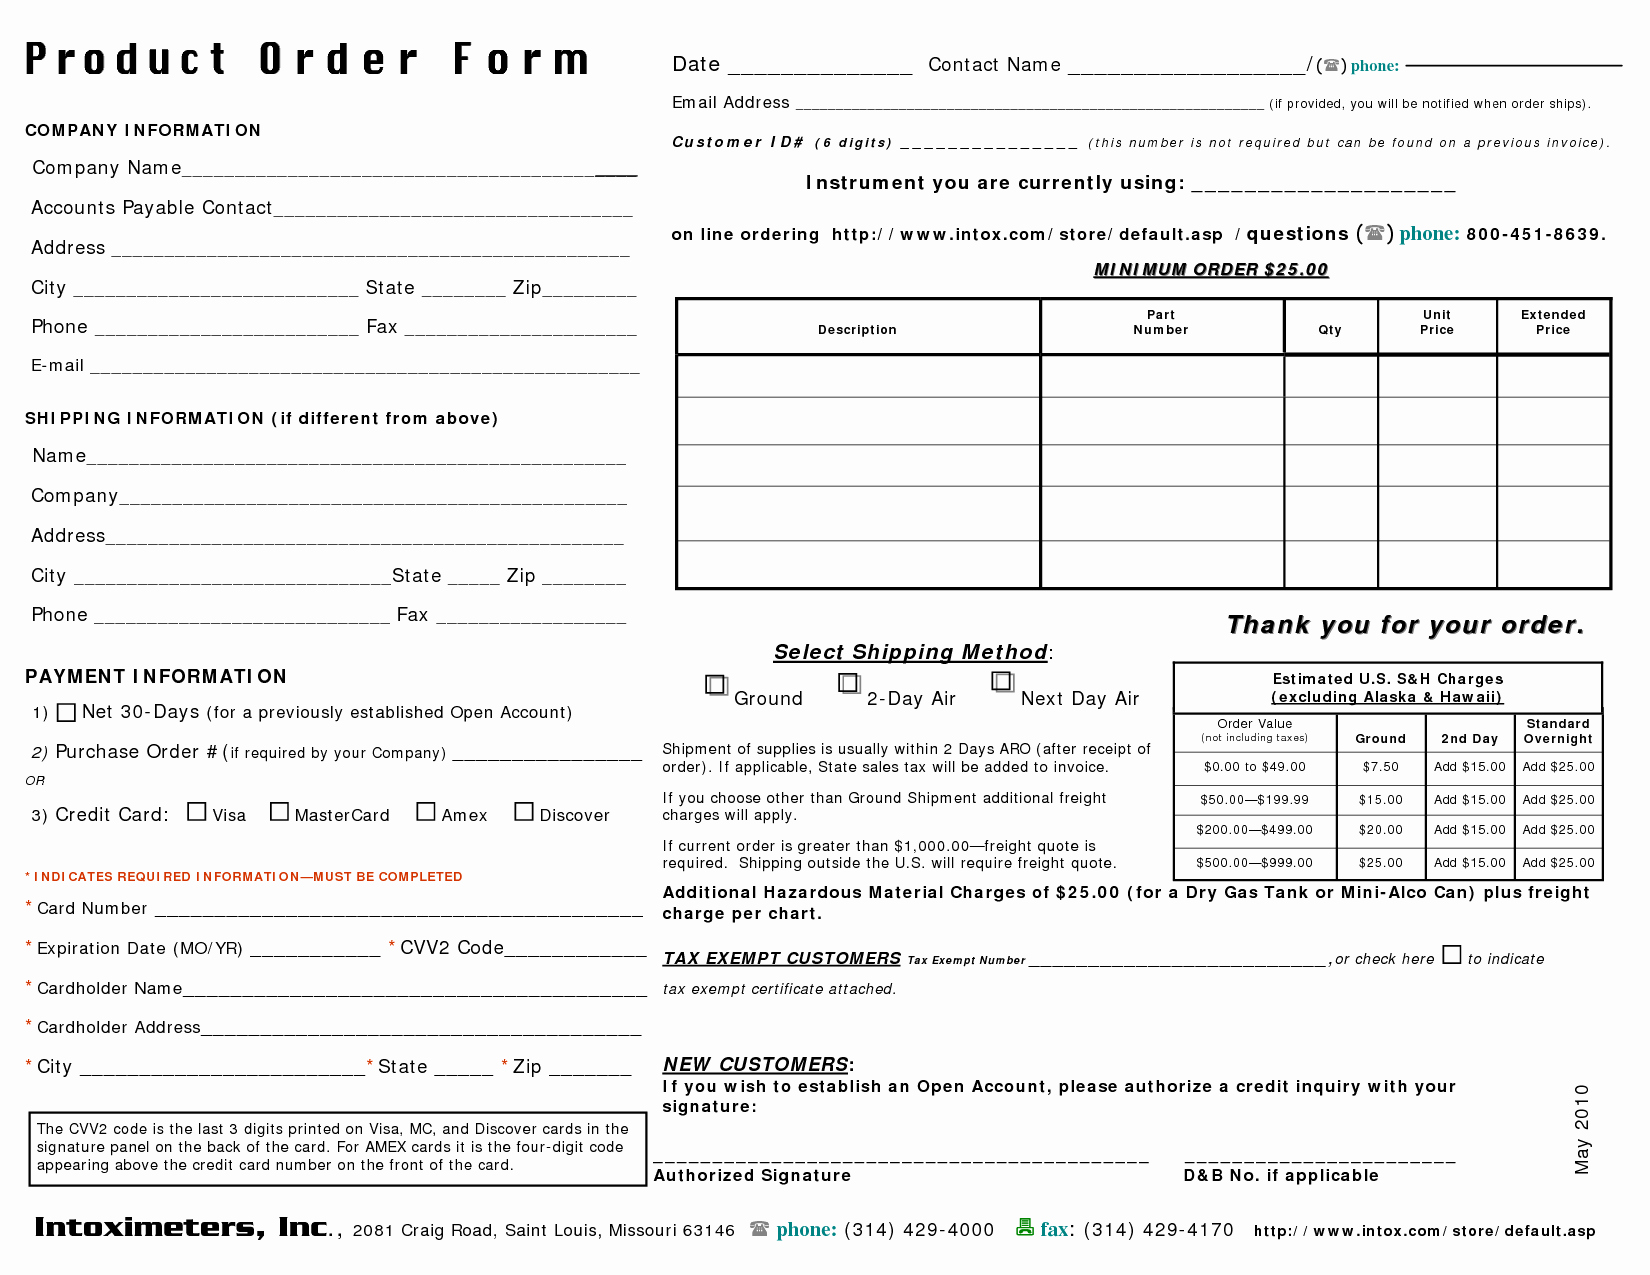 Best S Of Product order form Template wholesale